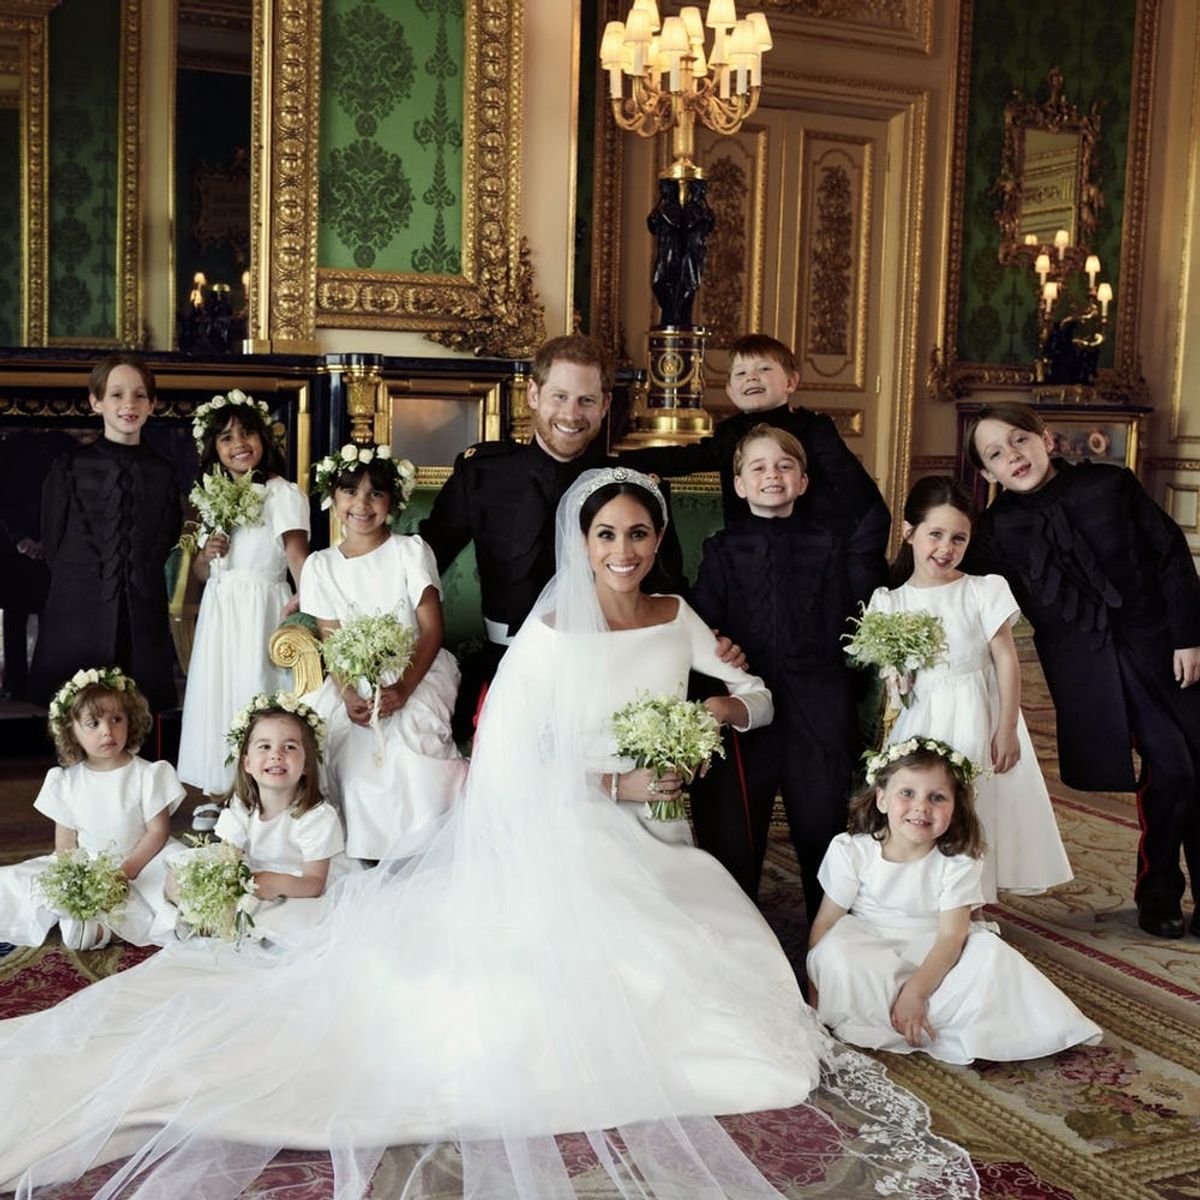 Prince Harry and Meghan Markle’s Official Wedding Portraits Are Here and They’re Stunning